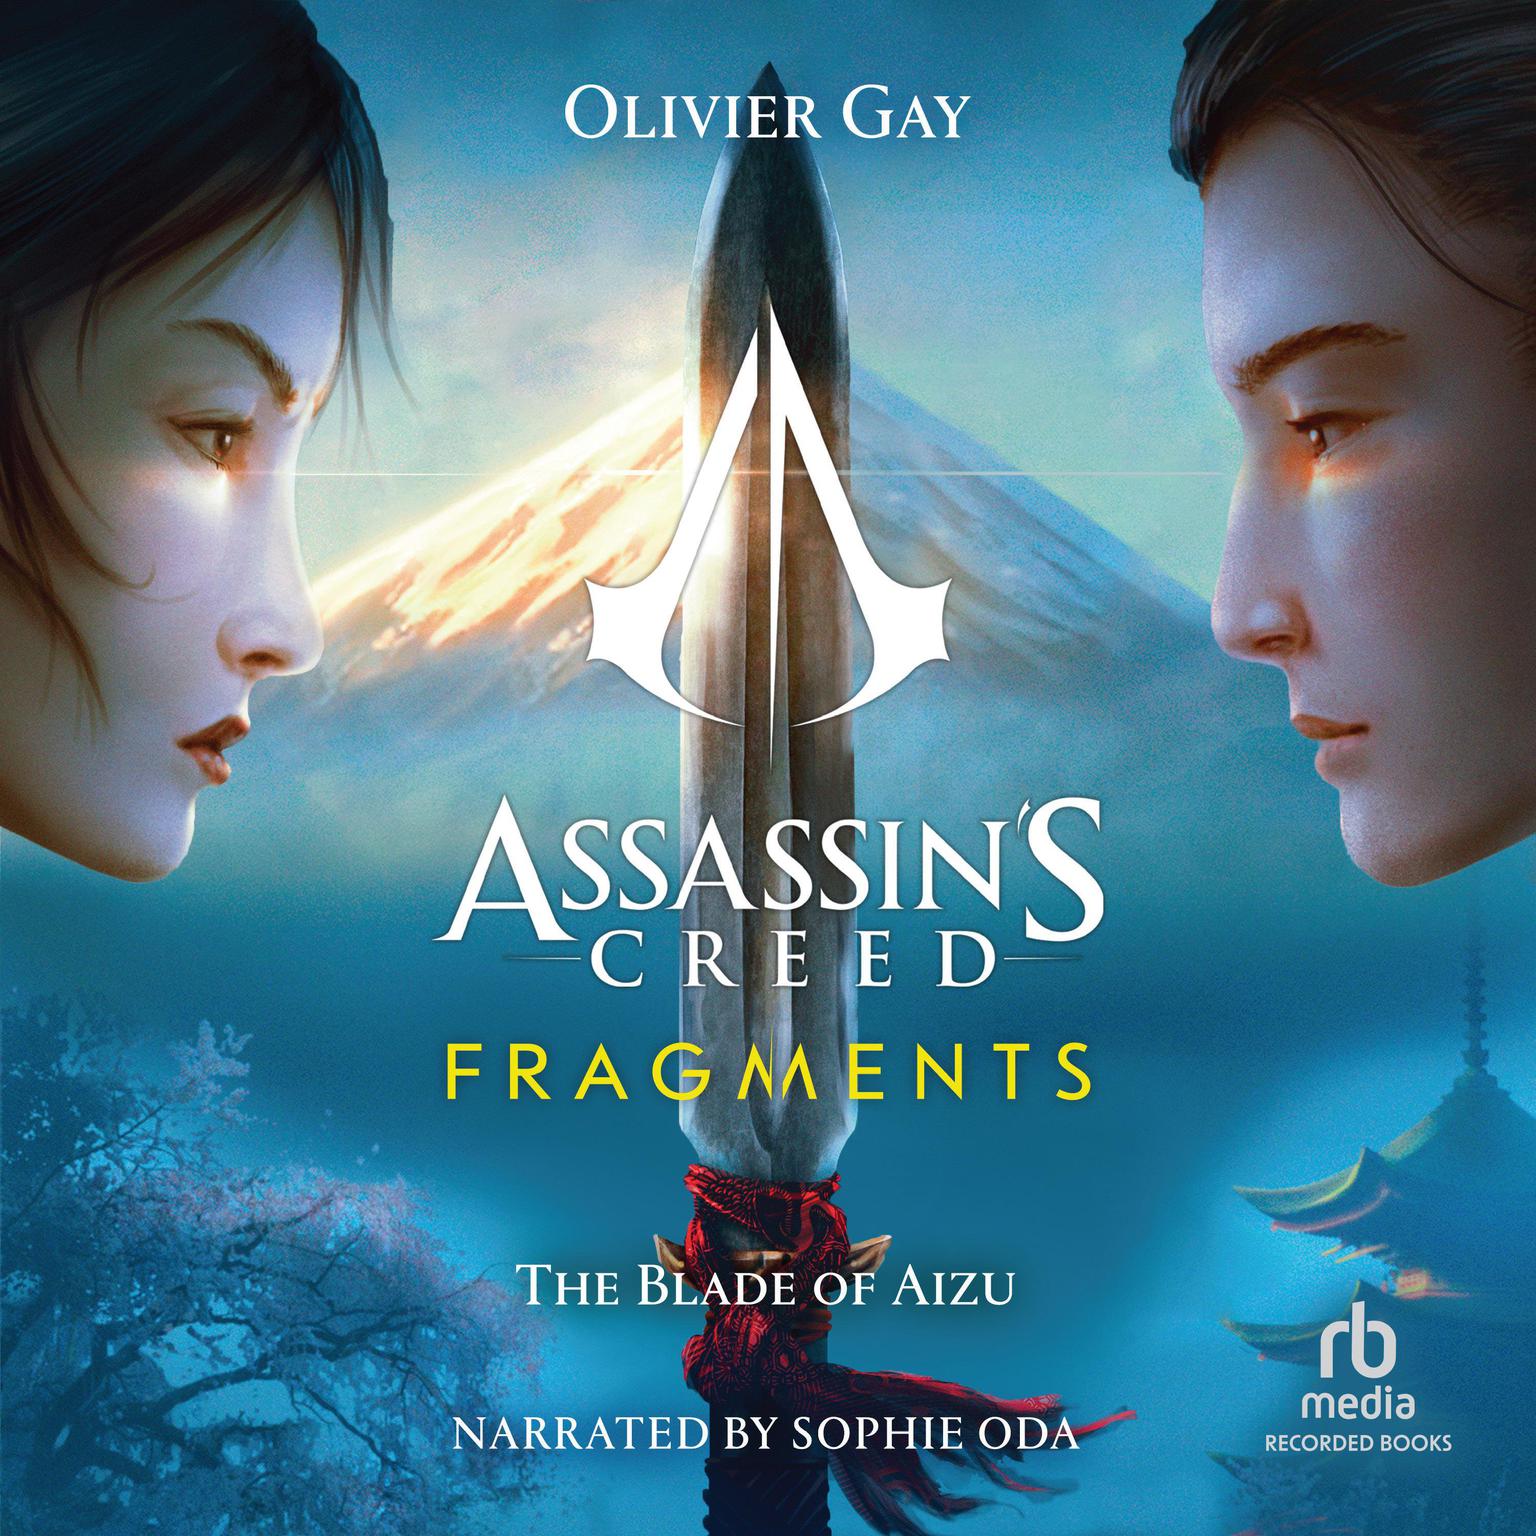 Assassins Creed - Fragments: The Blade of Aizu (La Lame dAizu) Audiobook, by Olivier Gay